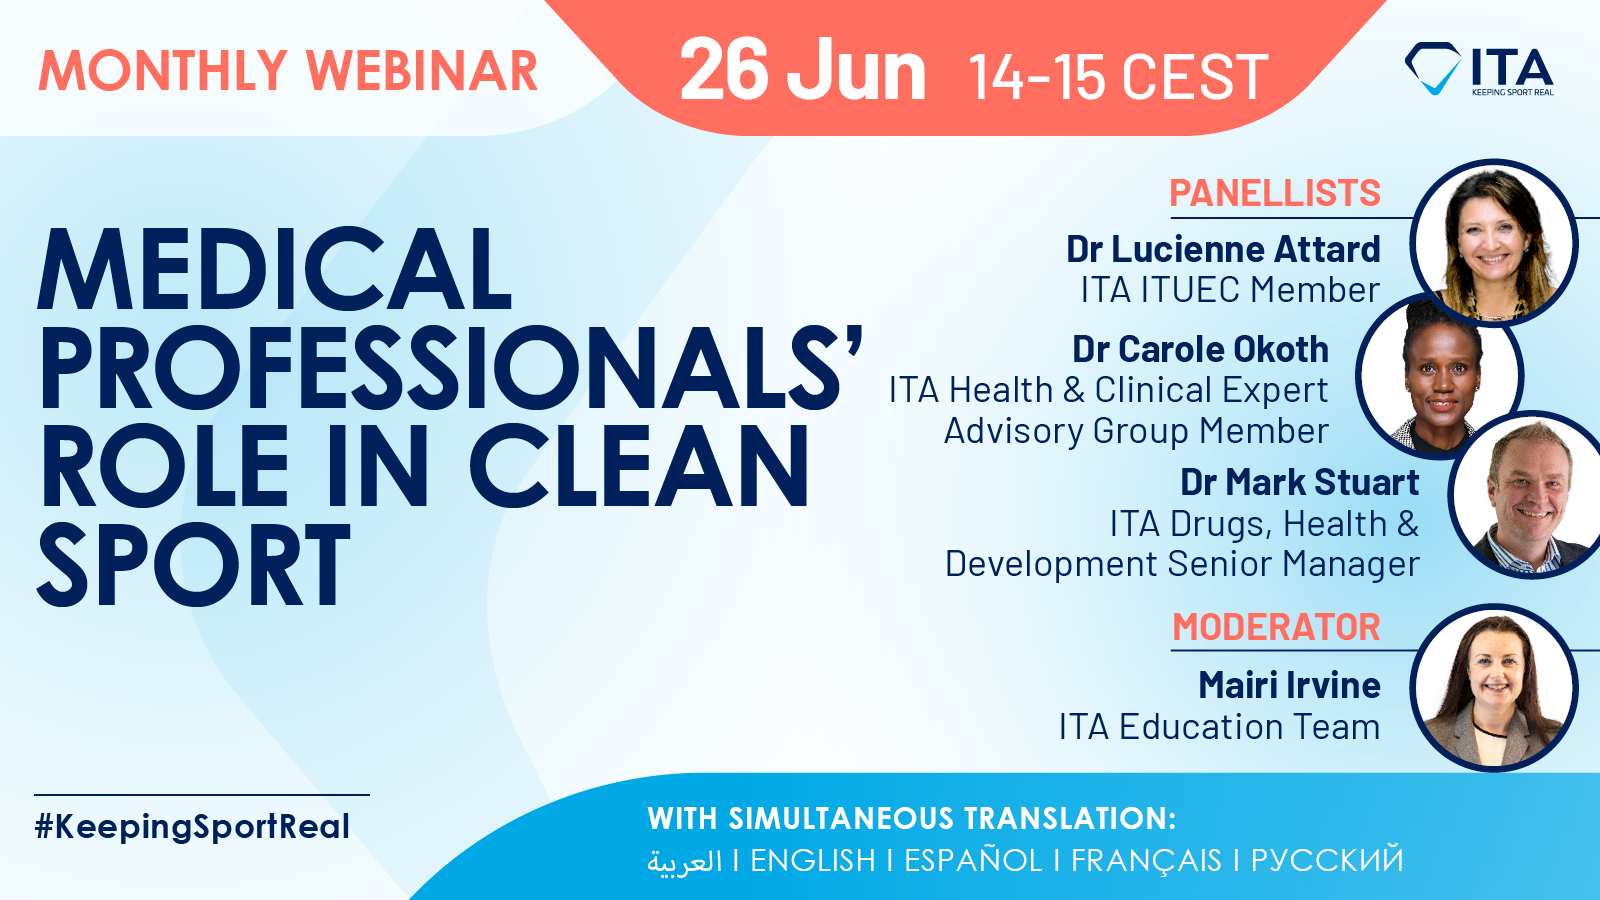 Monthly webinar - Medical Professionals’ Role in Clean Sport